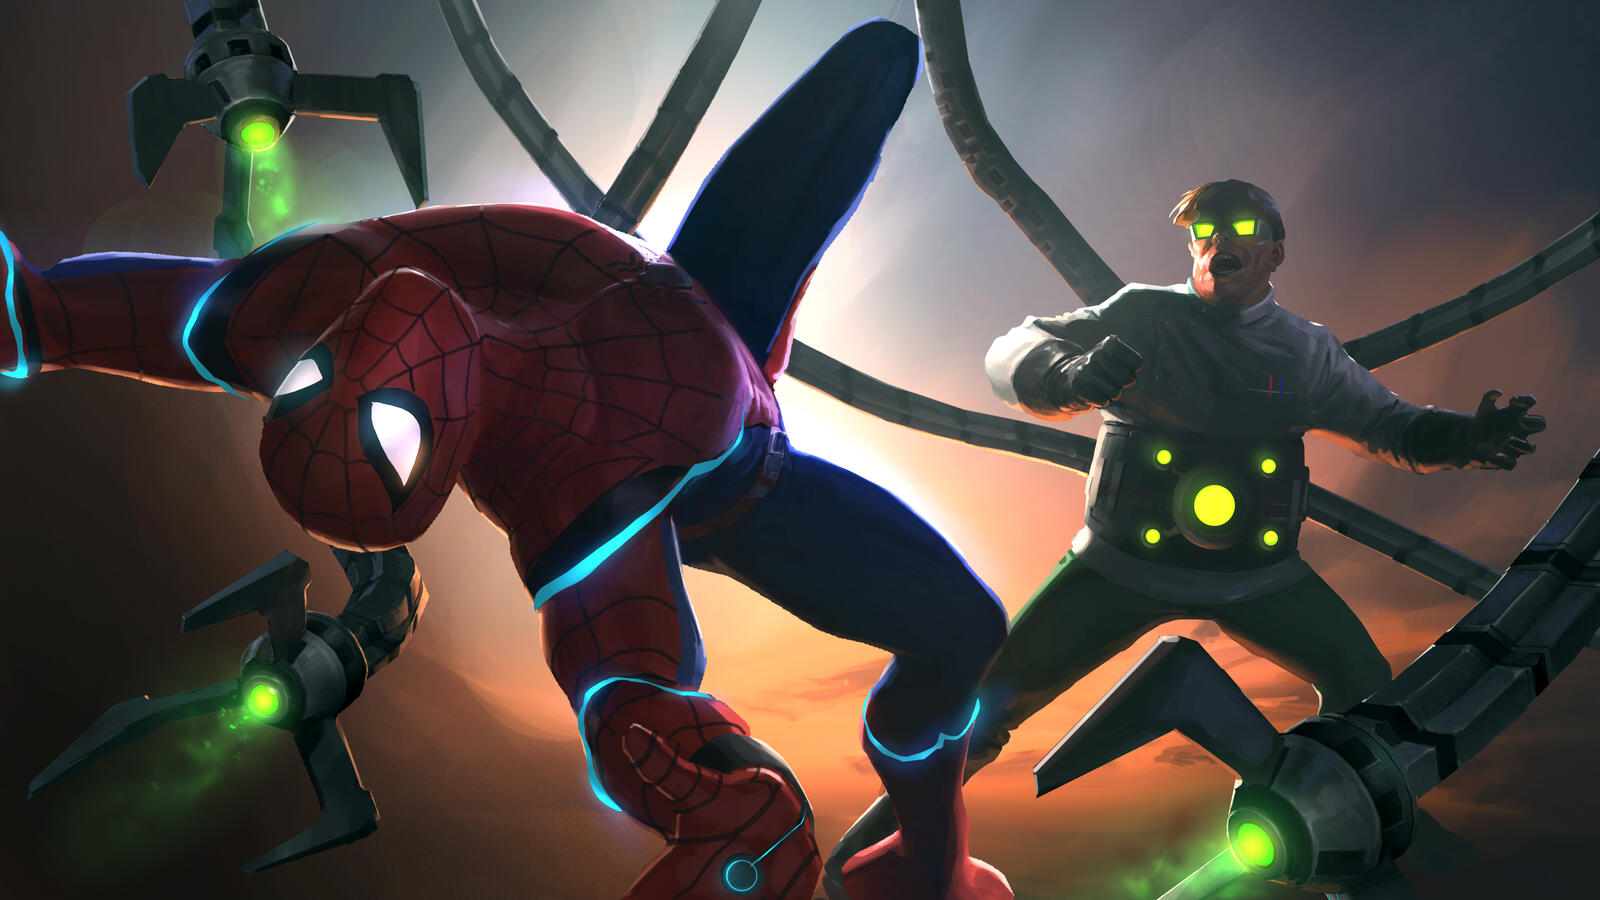 Wallpapers games marvel contest of champions boi on the desktop